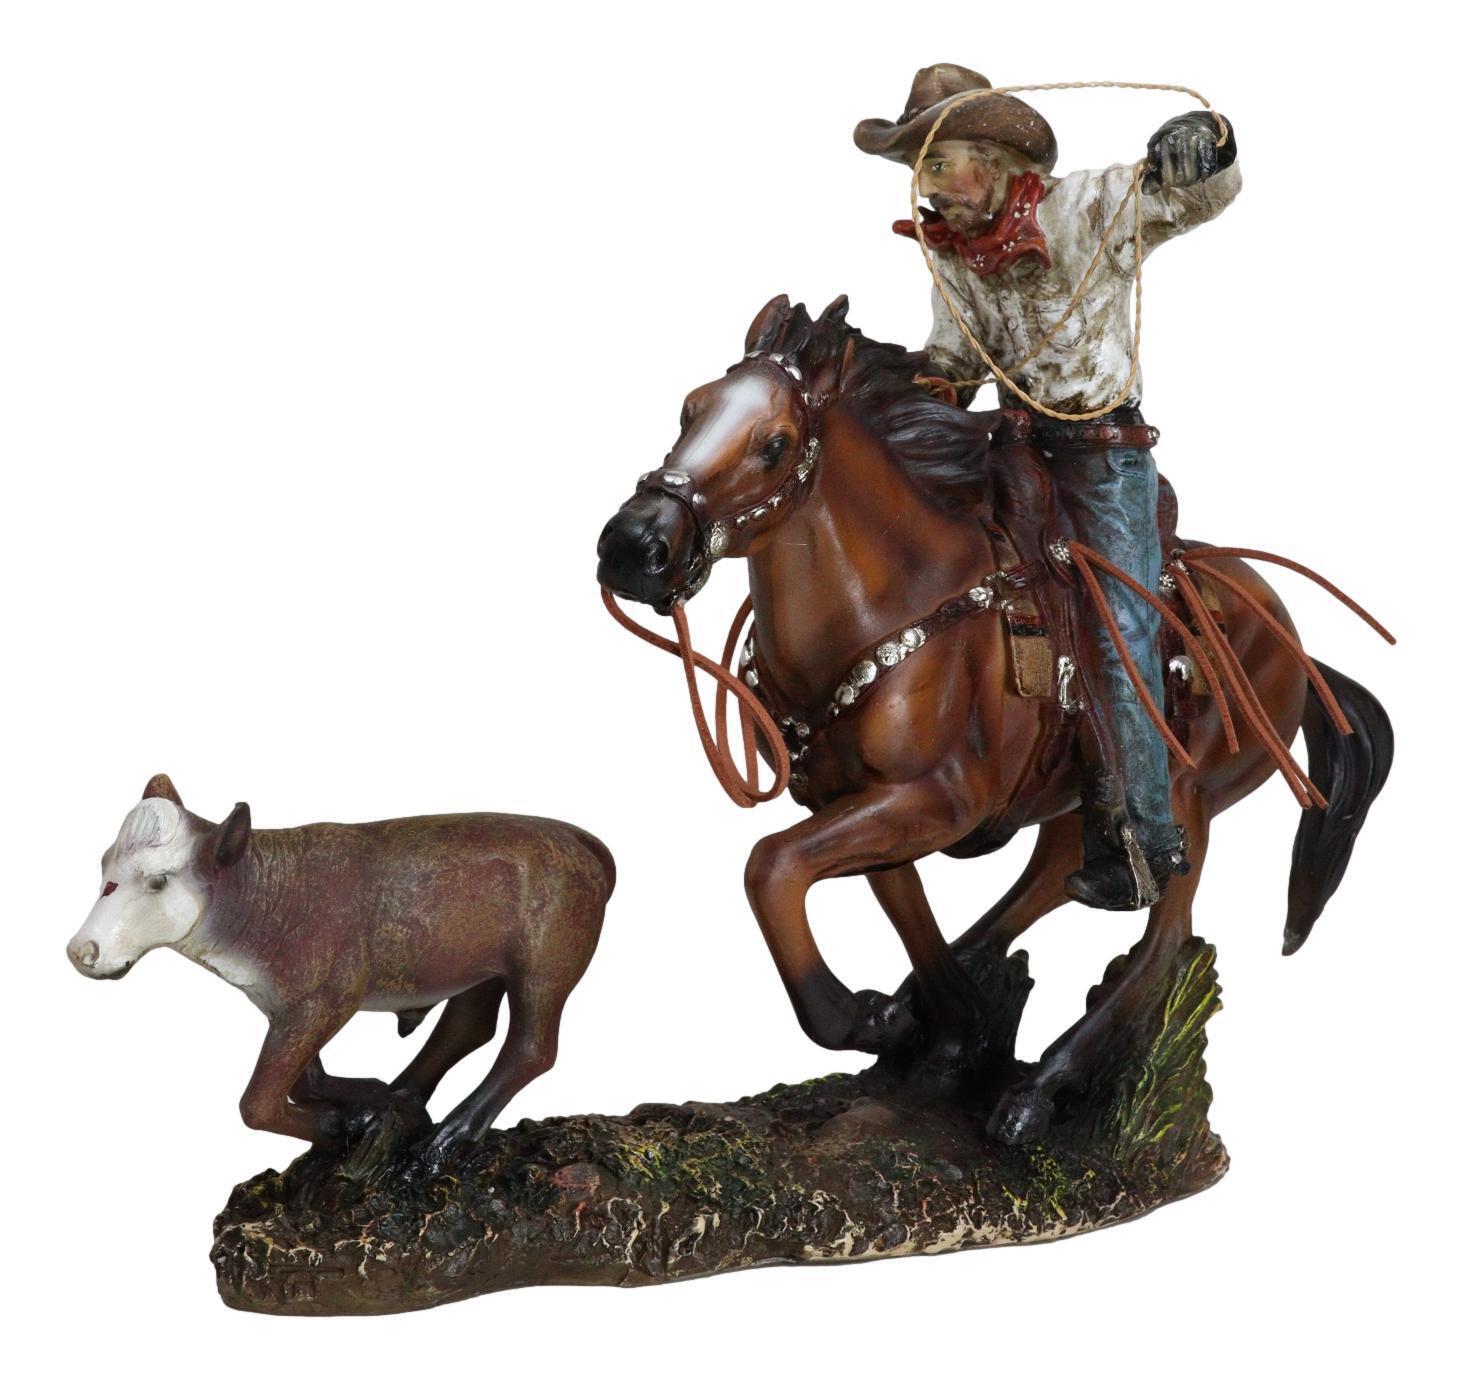 Rustic Western Cowboy Riding On Horse Rodeo Tie Down Roping A Calf Figurine